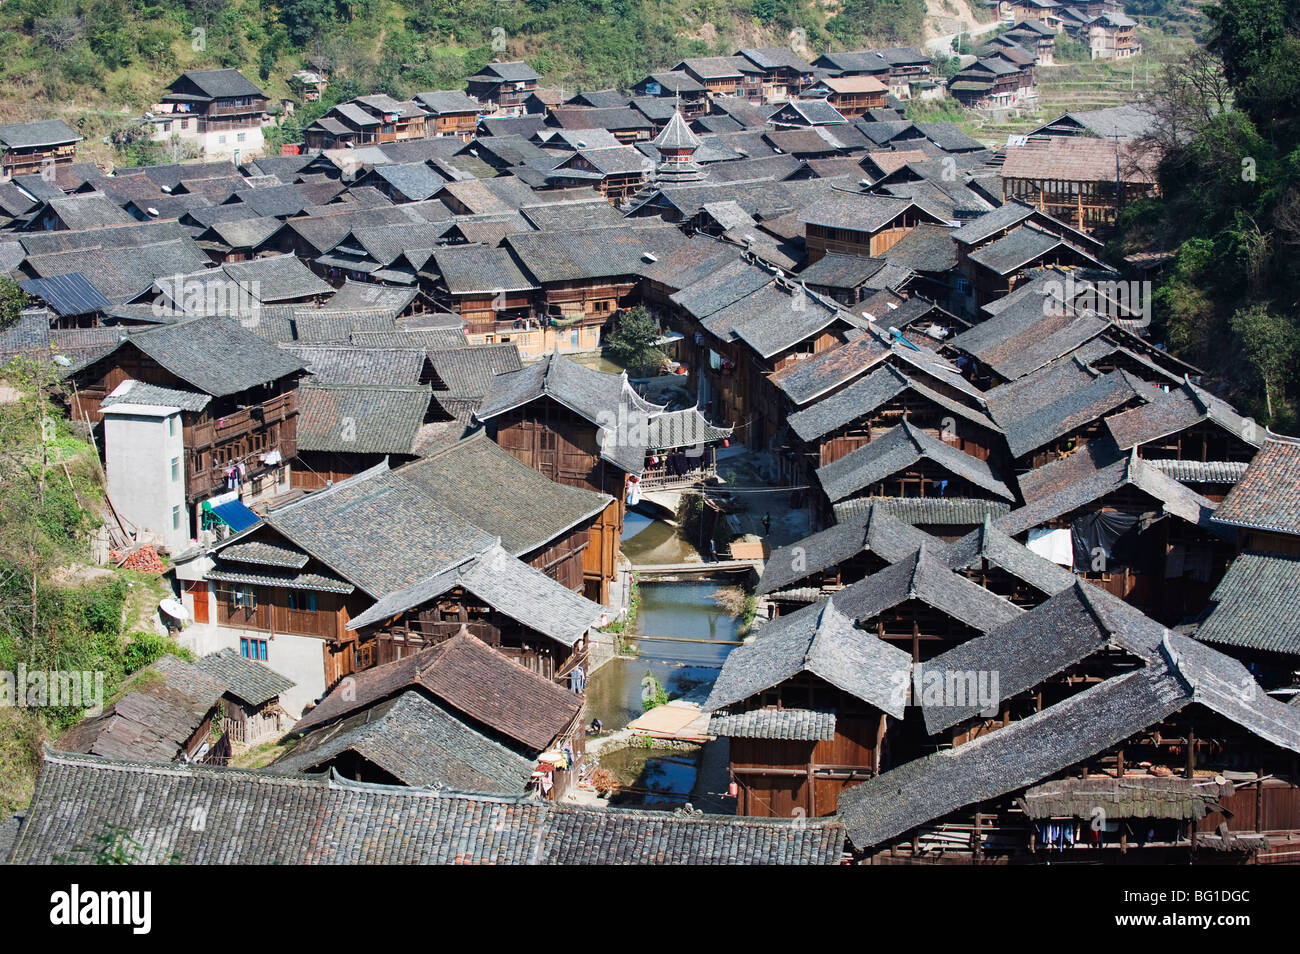 Traditional wooden houses in Zhaoxing Dong ethnic village, Guizhou Province, China, Asia Stock Photo